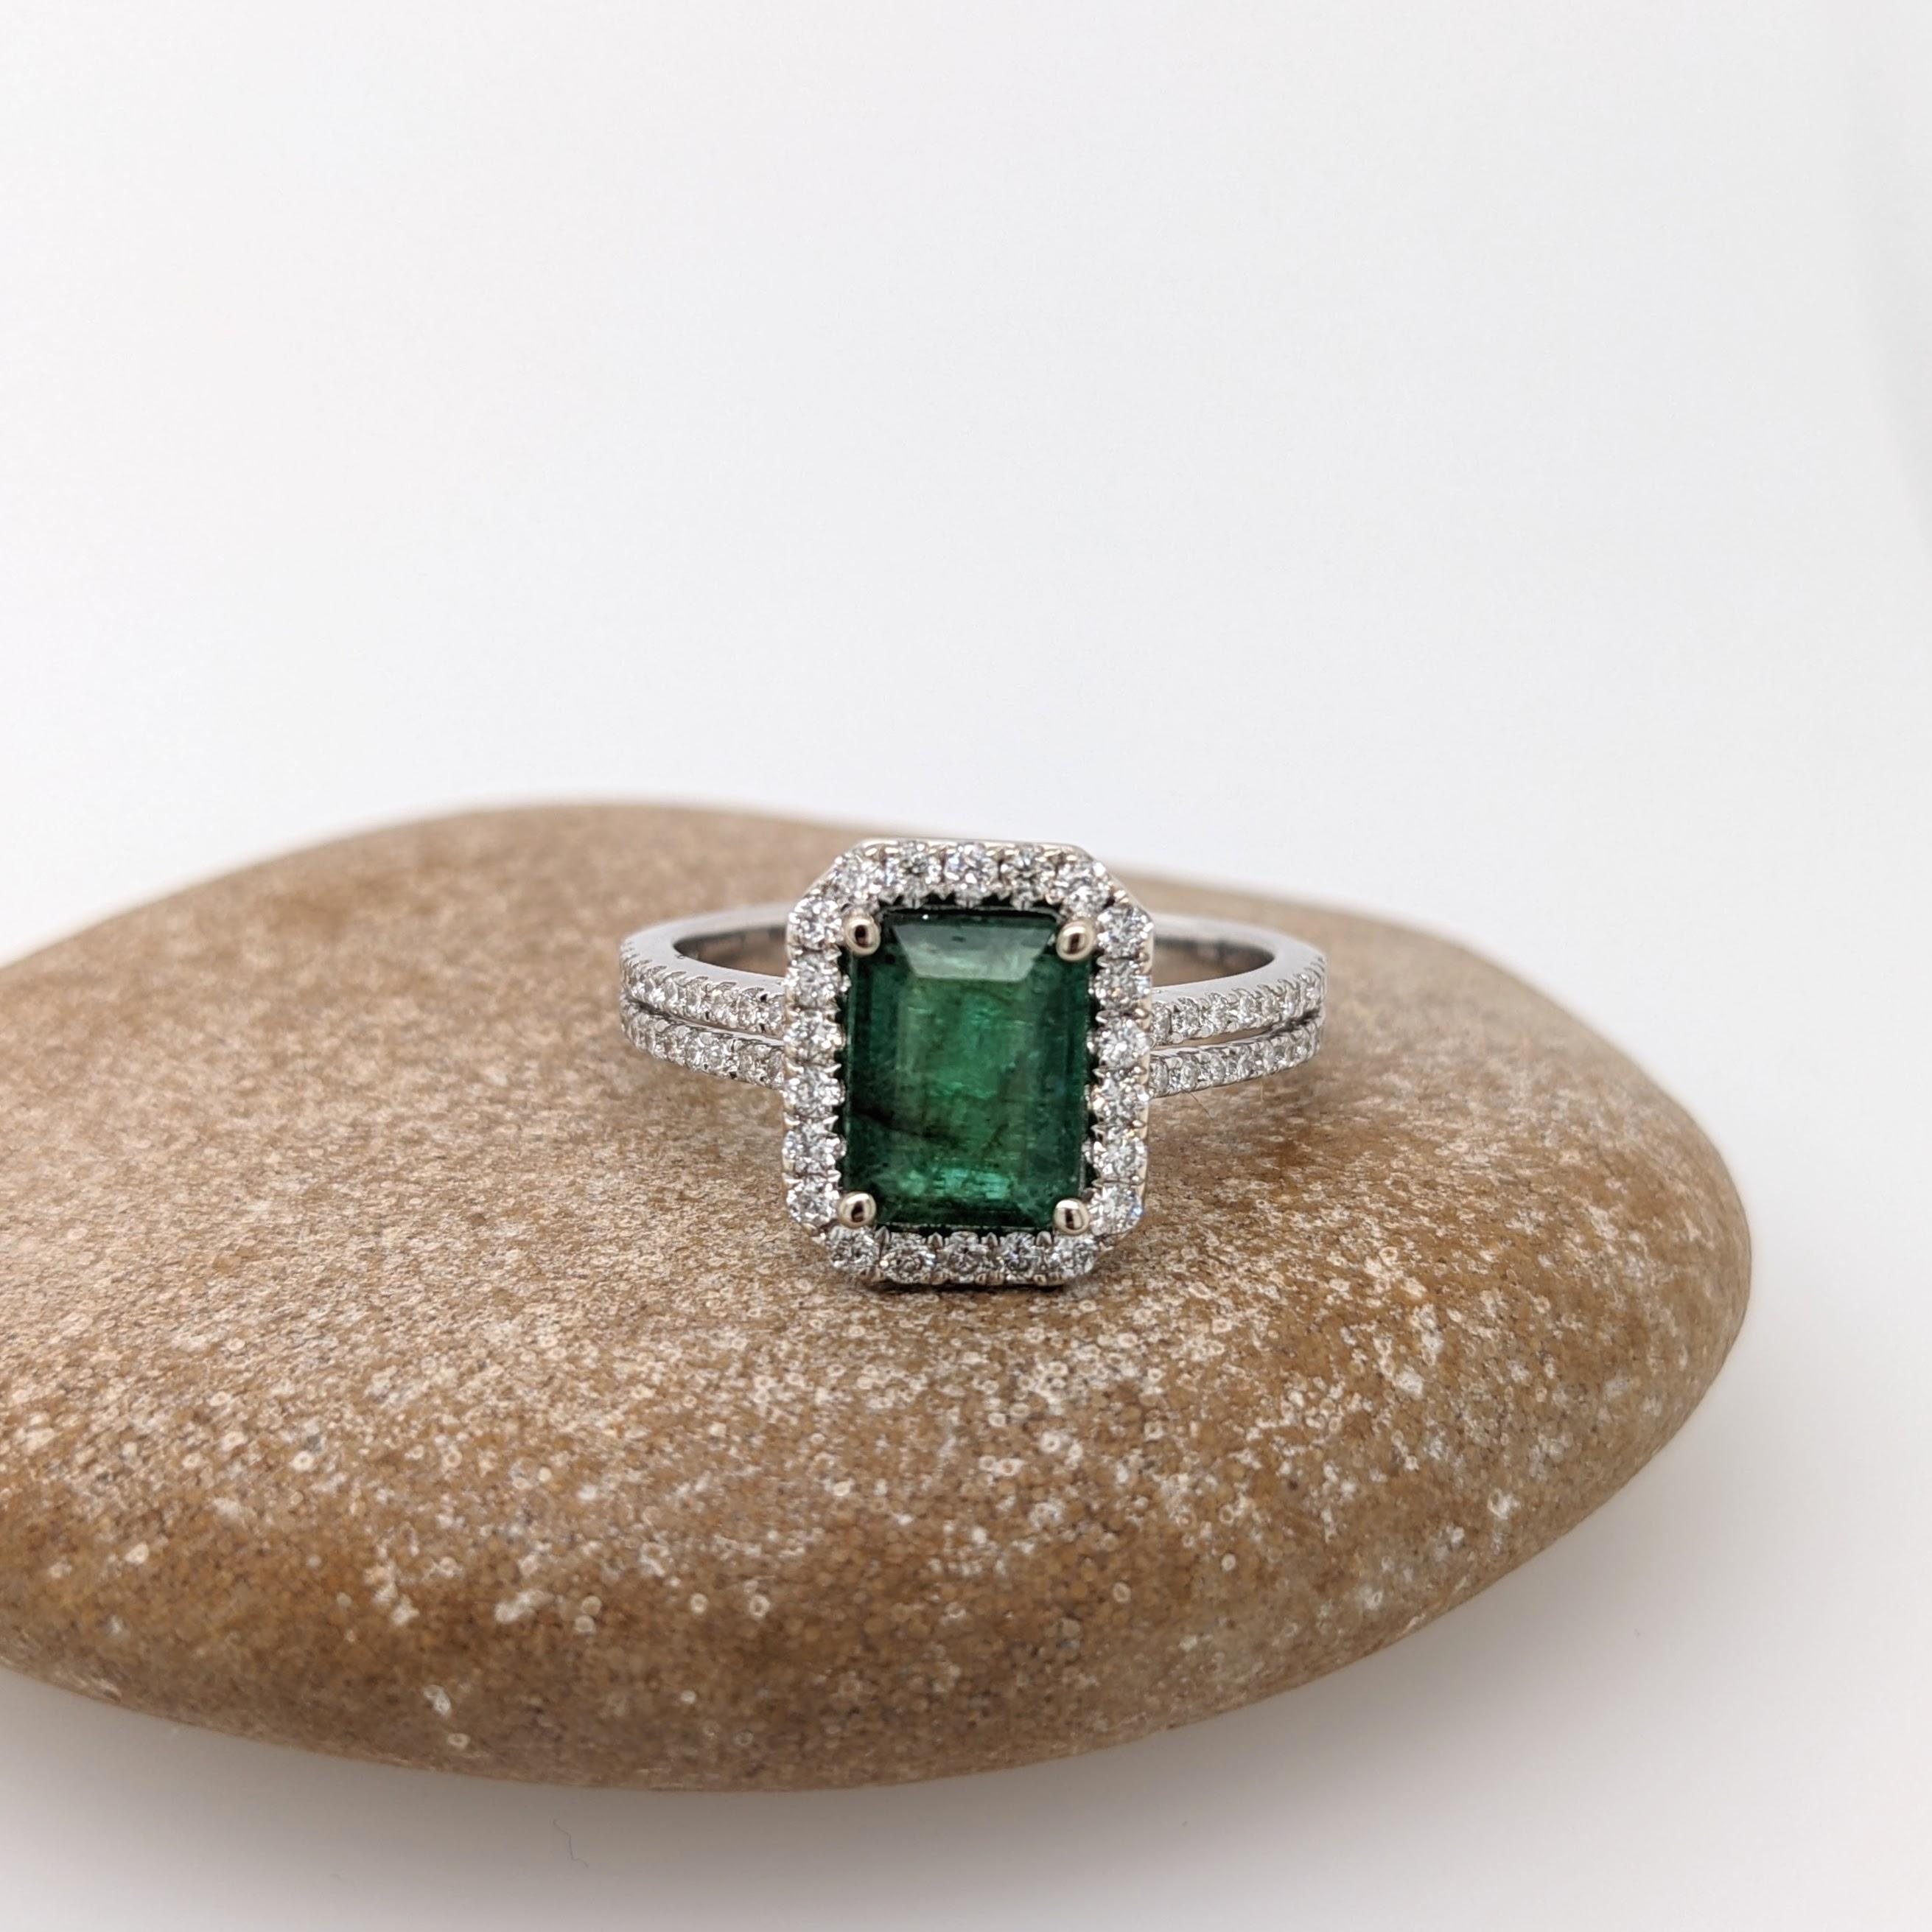 This ring features a beautiful emerald set in a split shank halo ring setting with sparkling natural diamonds all set in 14k solid white gold. A gorgeous modern look that's perfect for any special occasion!

Item Type: Ring
Center Stone: